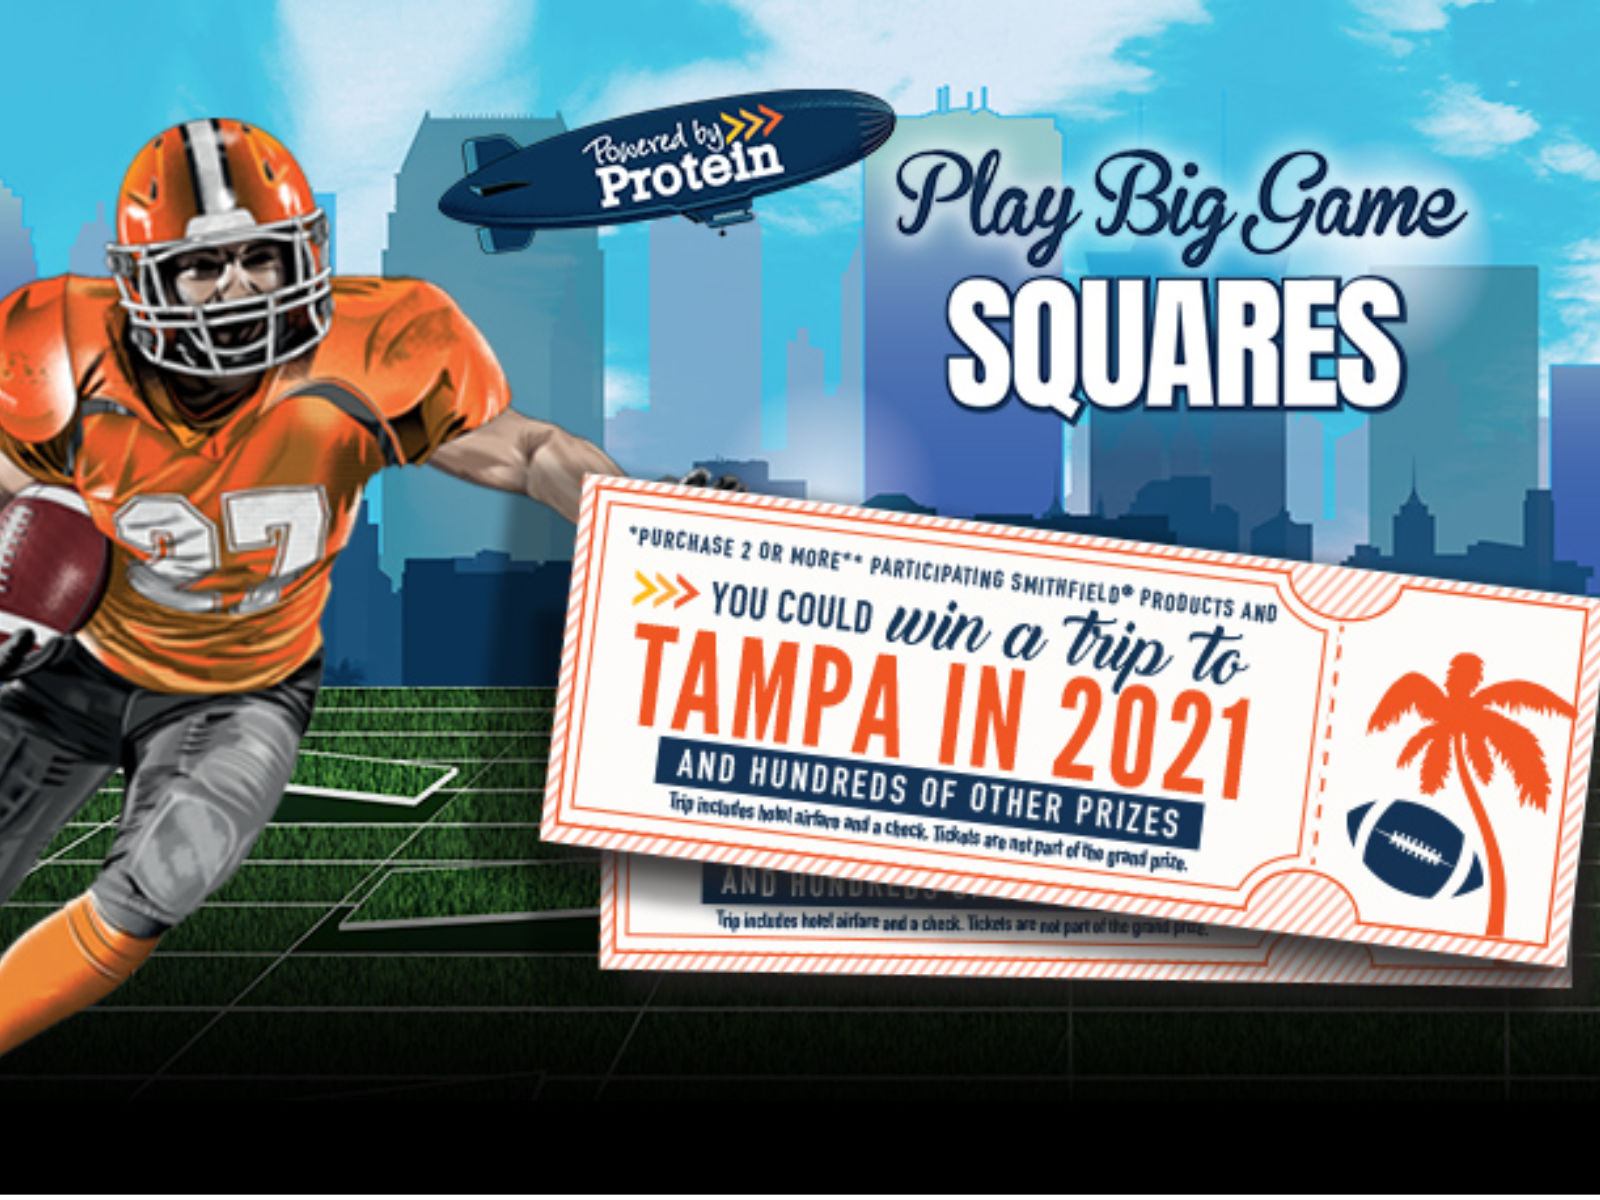 Still Time To Grab Delicious Smithfield Food Products & Play The Publix Big Game Squares Instant Win Game And Sweepstakes